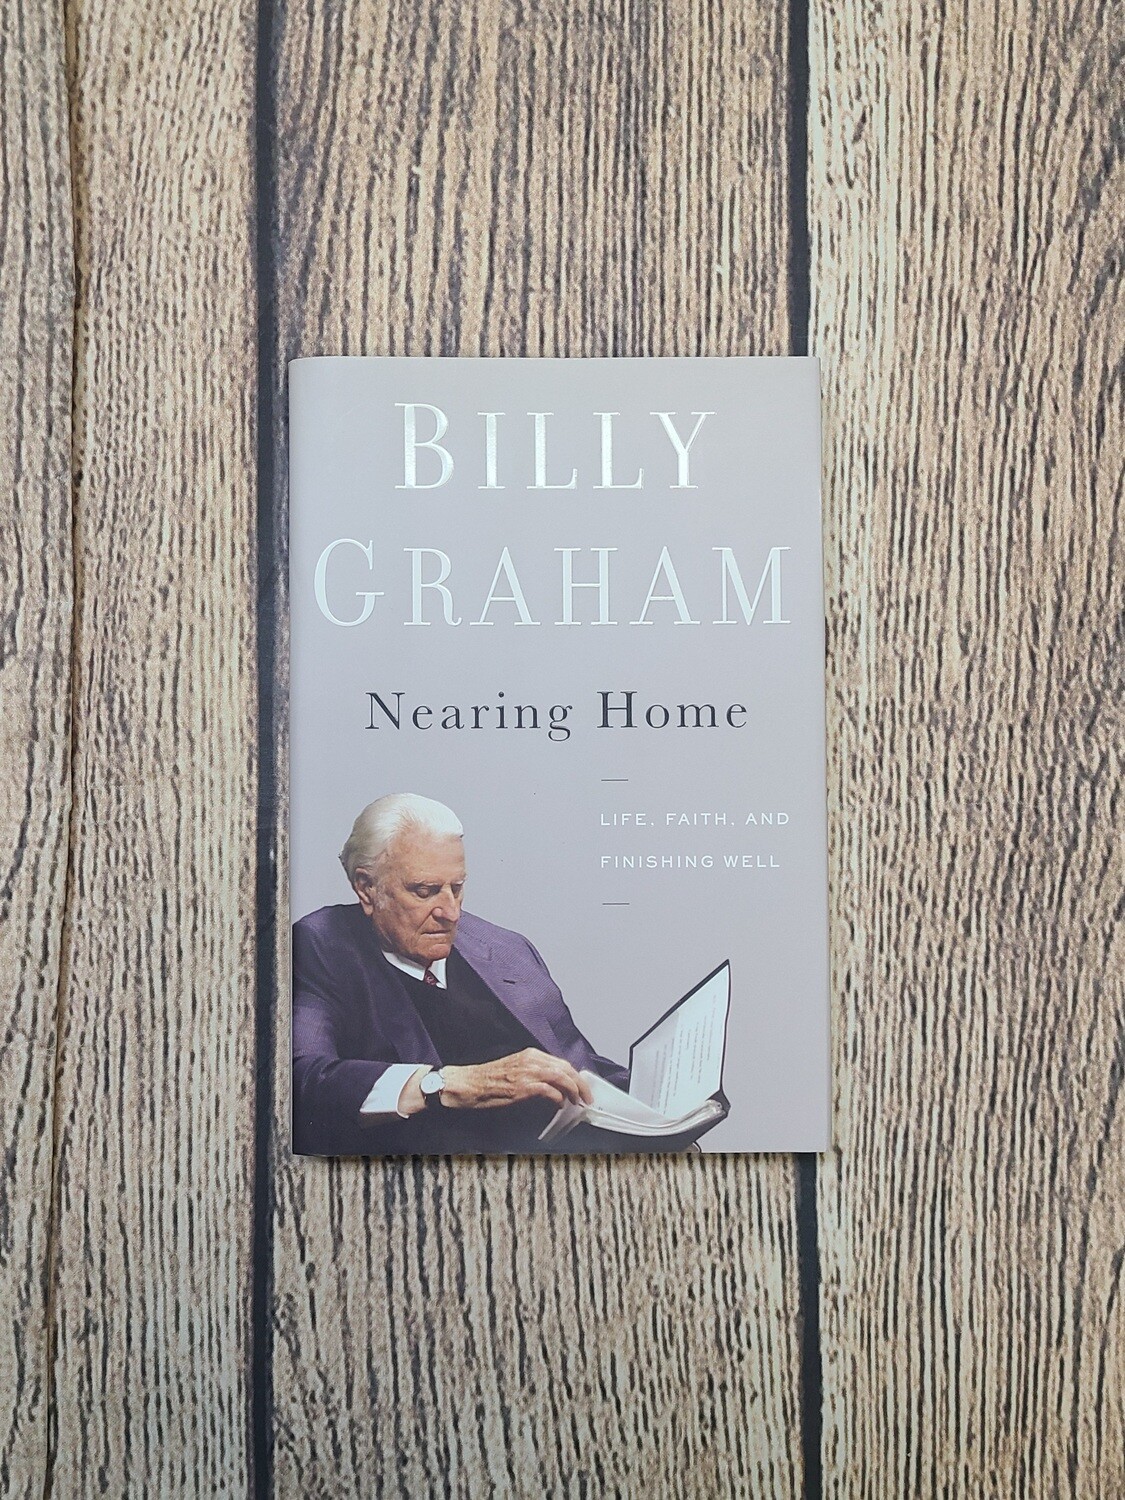 Nearing Home by Billy Graham